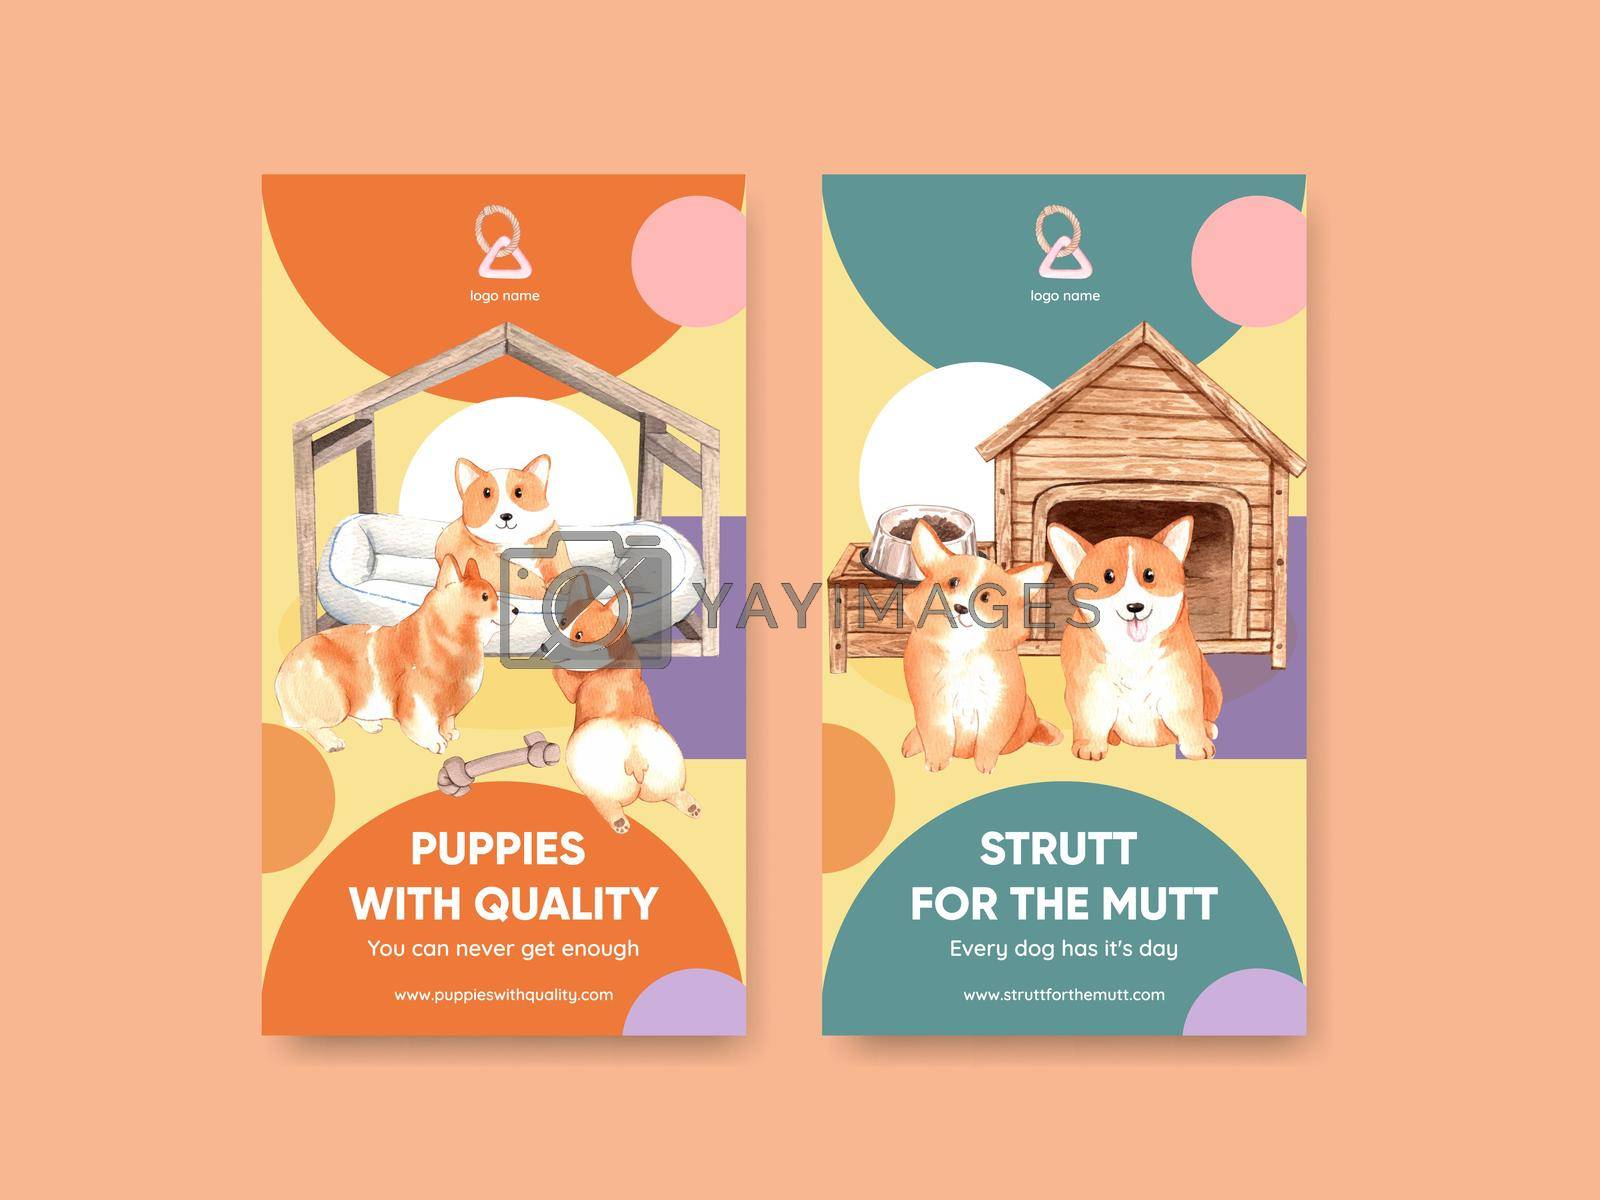 Royalty free image of Instagram template with corgi dog concept,watercolor style by Photographeeasia